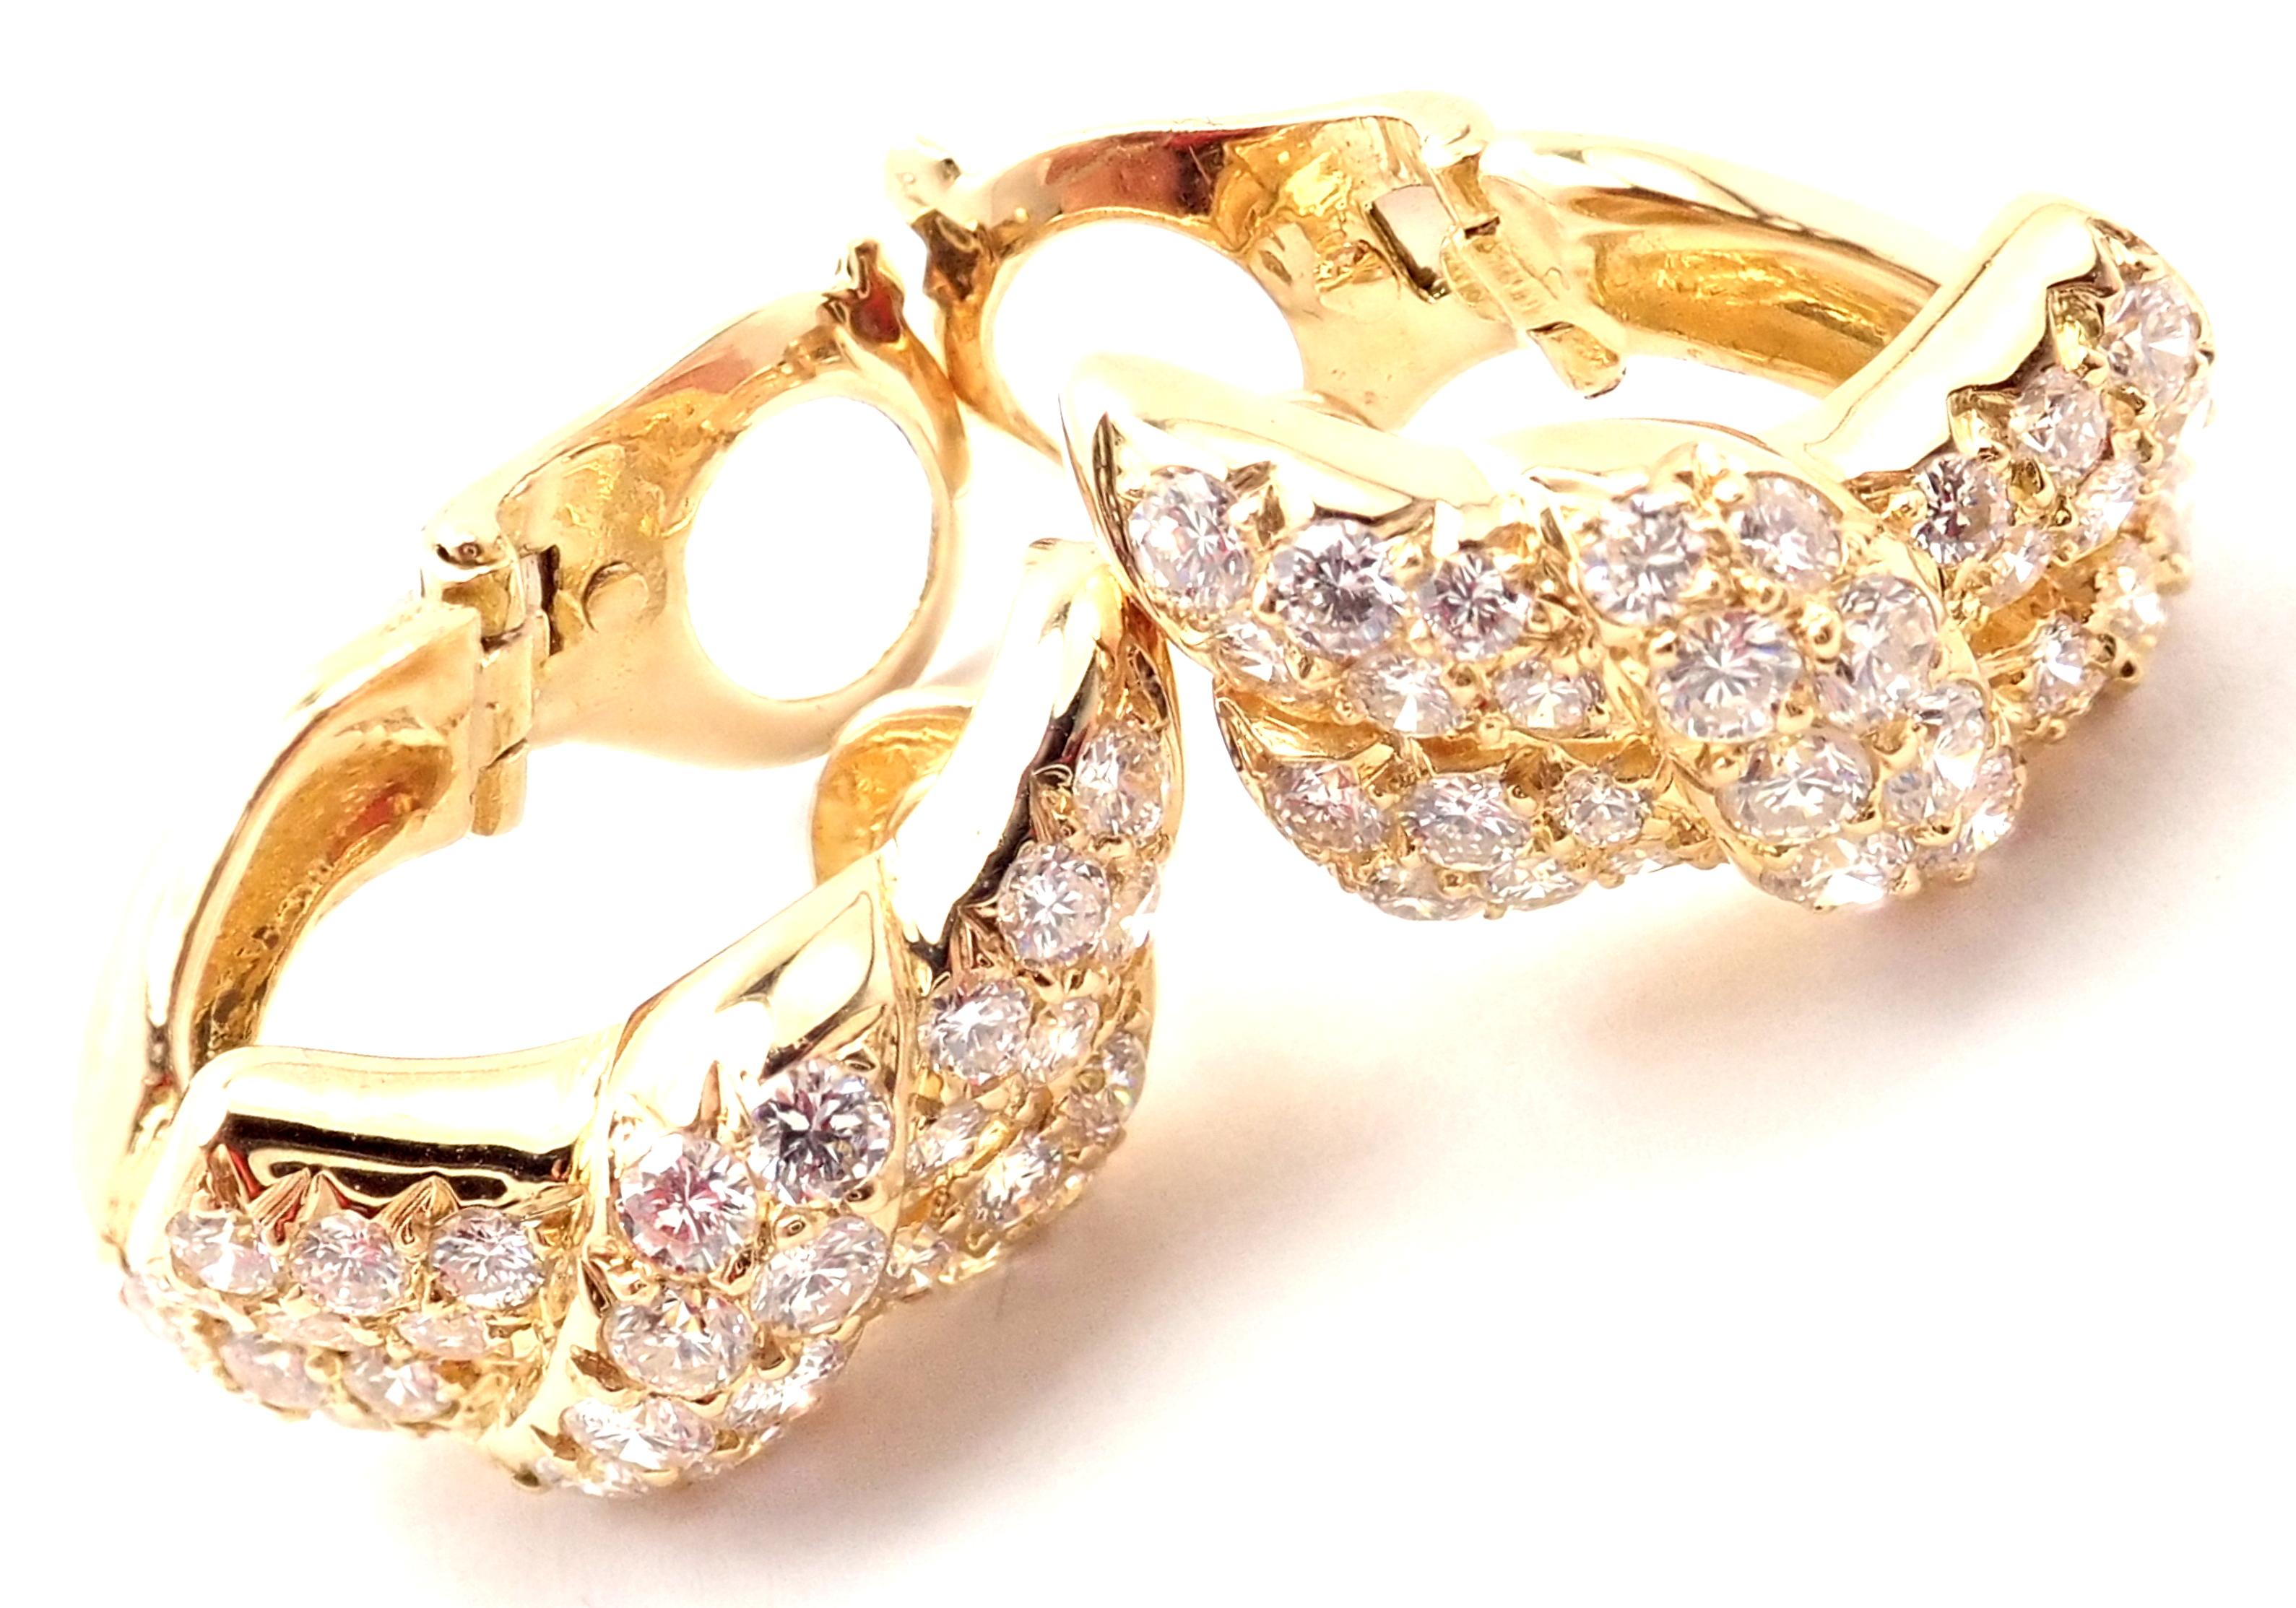 Van Cleef & Arpels Diamond Bow Yellow Gold Earrings In Excellent Condition For Sale In Holland, PA